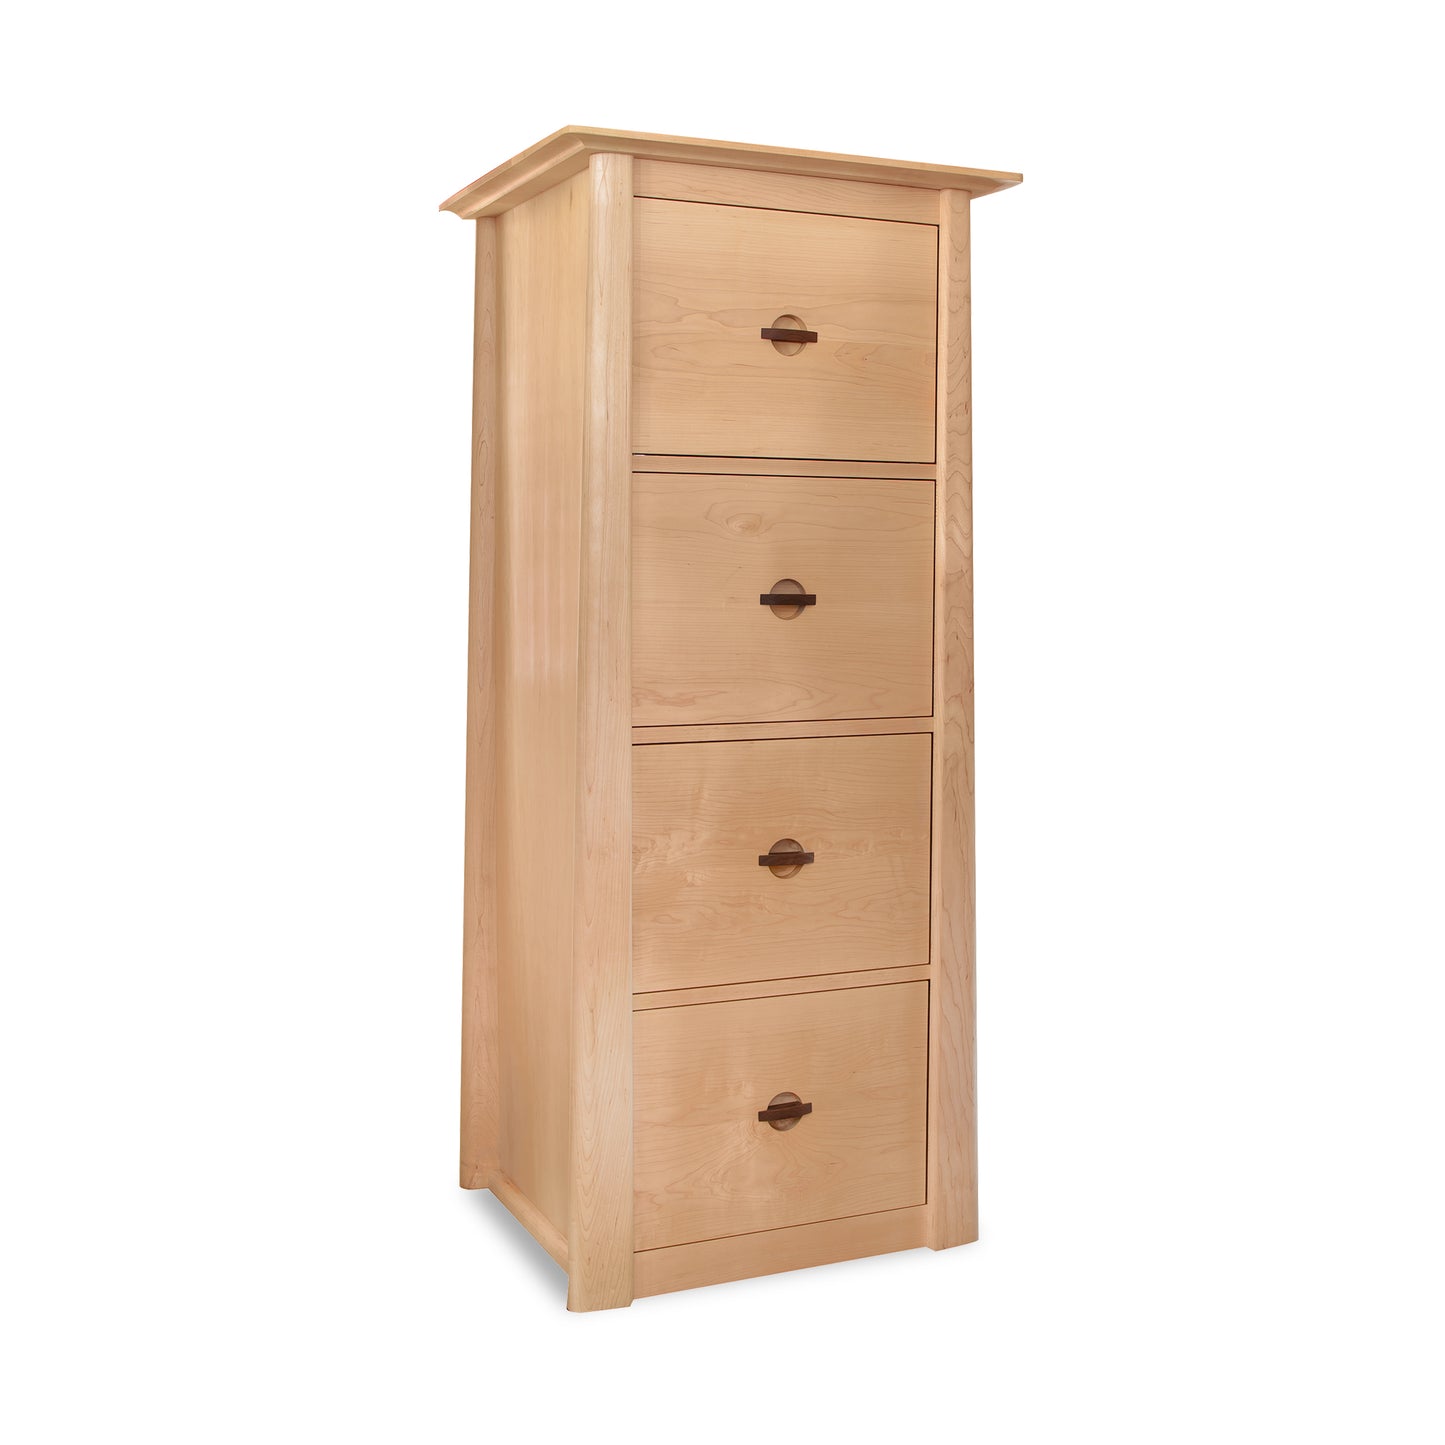 A tall Cherry Moon File Filing Cabinet with four drawers from Maple Corner Woodworks isolated on a white background.